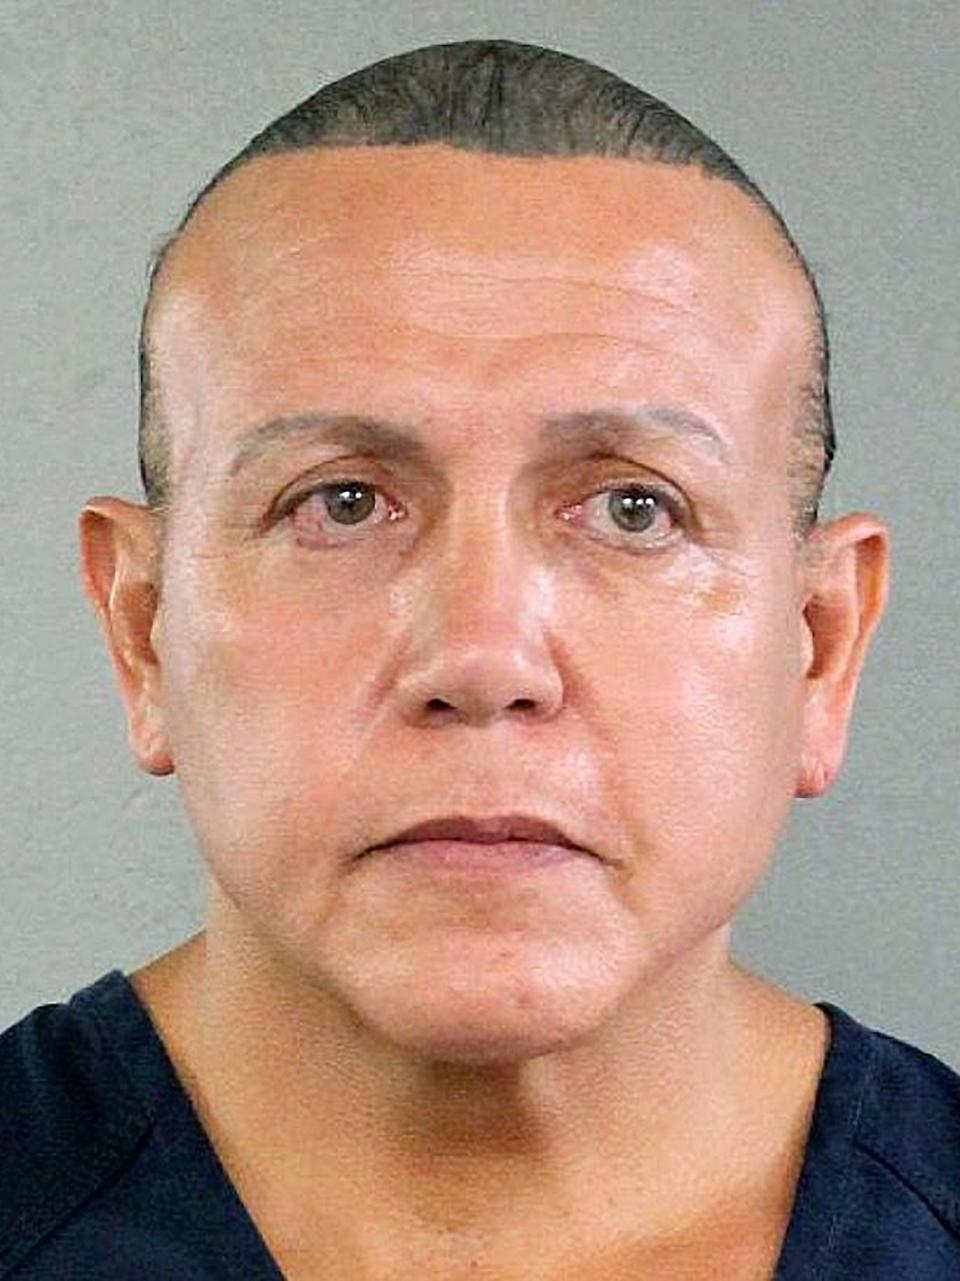 Cesar Sayoc mailed a series of explosive devices to prominent Democrats.